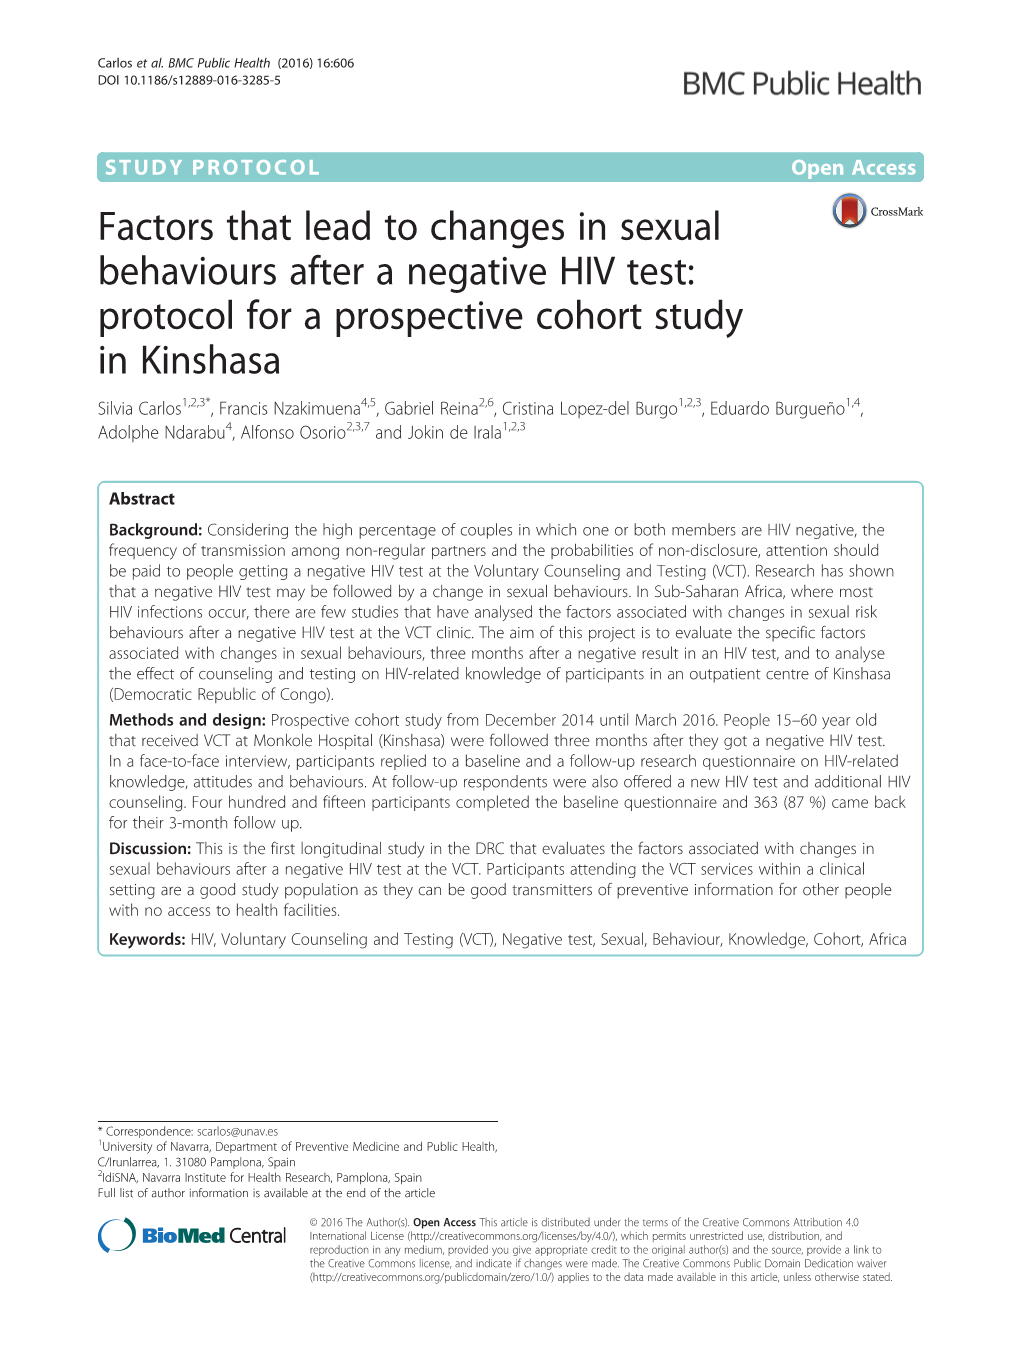 Factors That Lead to Changes in Sexual Behaviours